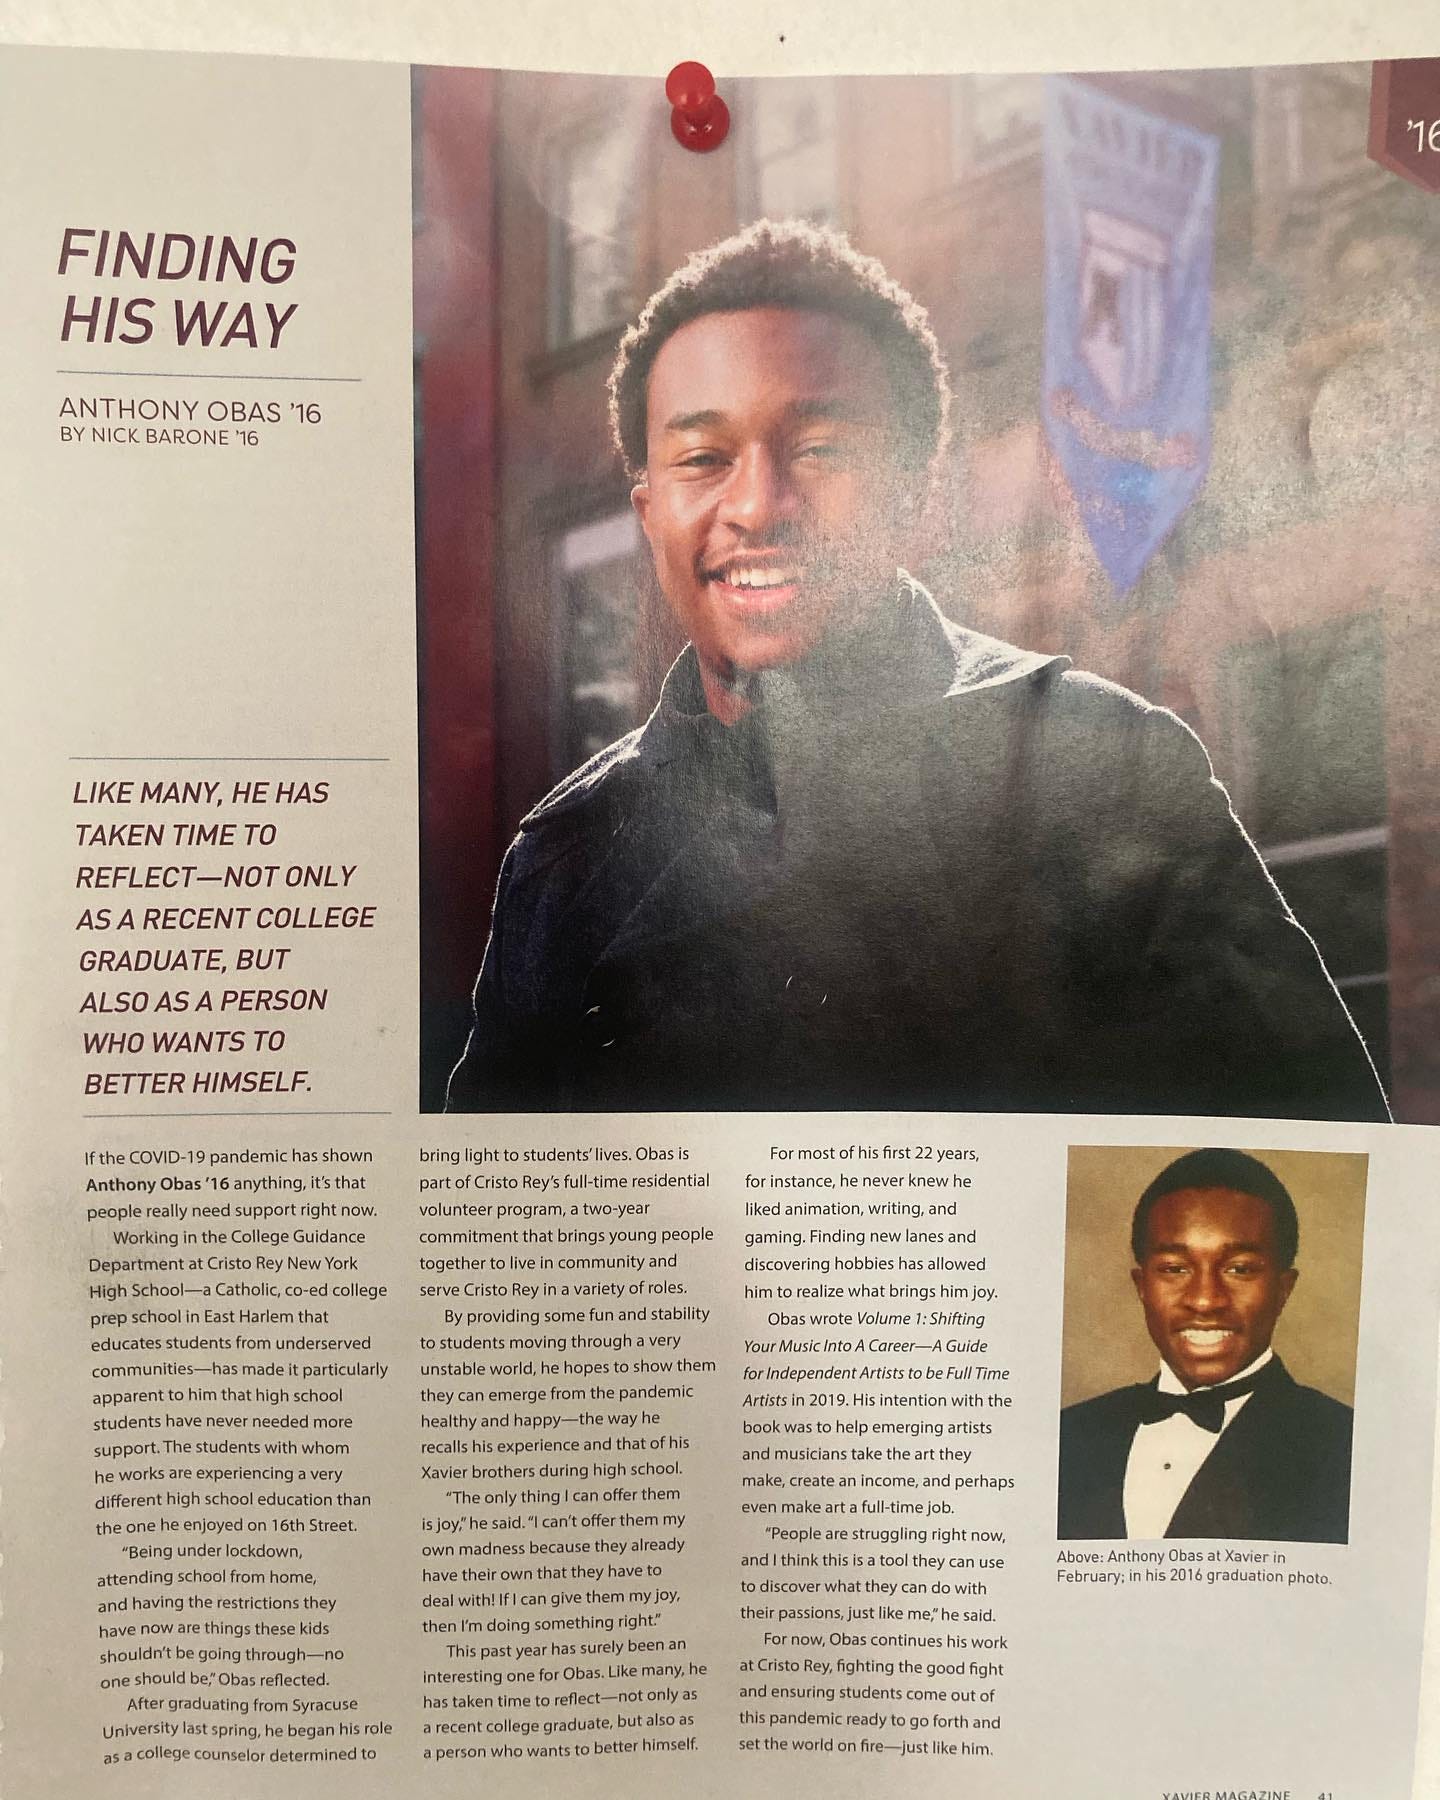 May be an image of 2 people and text that says 'FINDING HIS WAY '16 ANTHONY OBAS '16 BY NICK BARONE LIKE MANY, He HAS TAKEN TIME TO REFLECT-NOT ONLY ARECENT COLLEGE GRADUATE, BUT ALSO PERSON WHO WANTS TO BETTER HIMSELF. bring| Working F2, .Finding FullTime February: kentimeto atXavier photo. work'